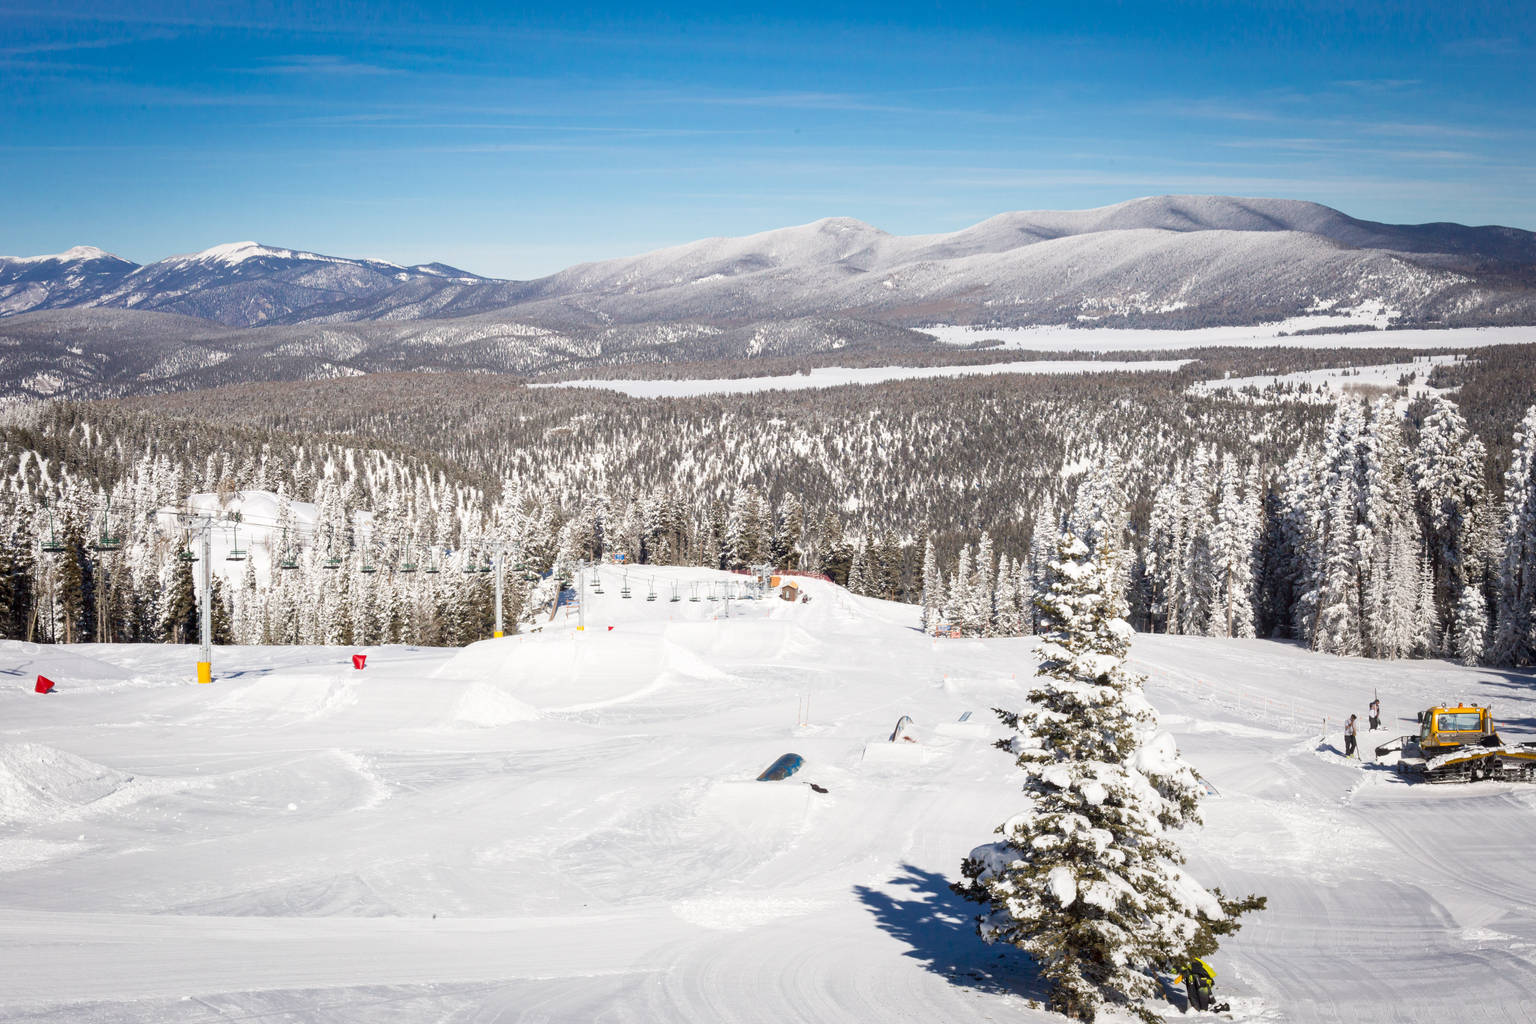 Angel Fire, New Mexico Vacation Rentals: Ski-In Ski-Out Cabins, Condos, Chalets, & Lodges